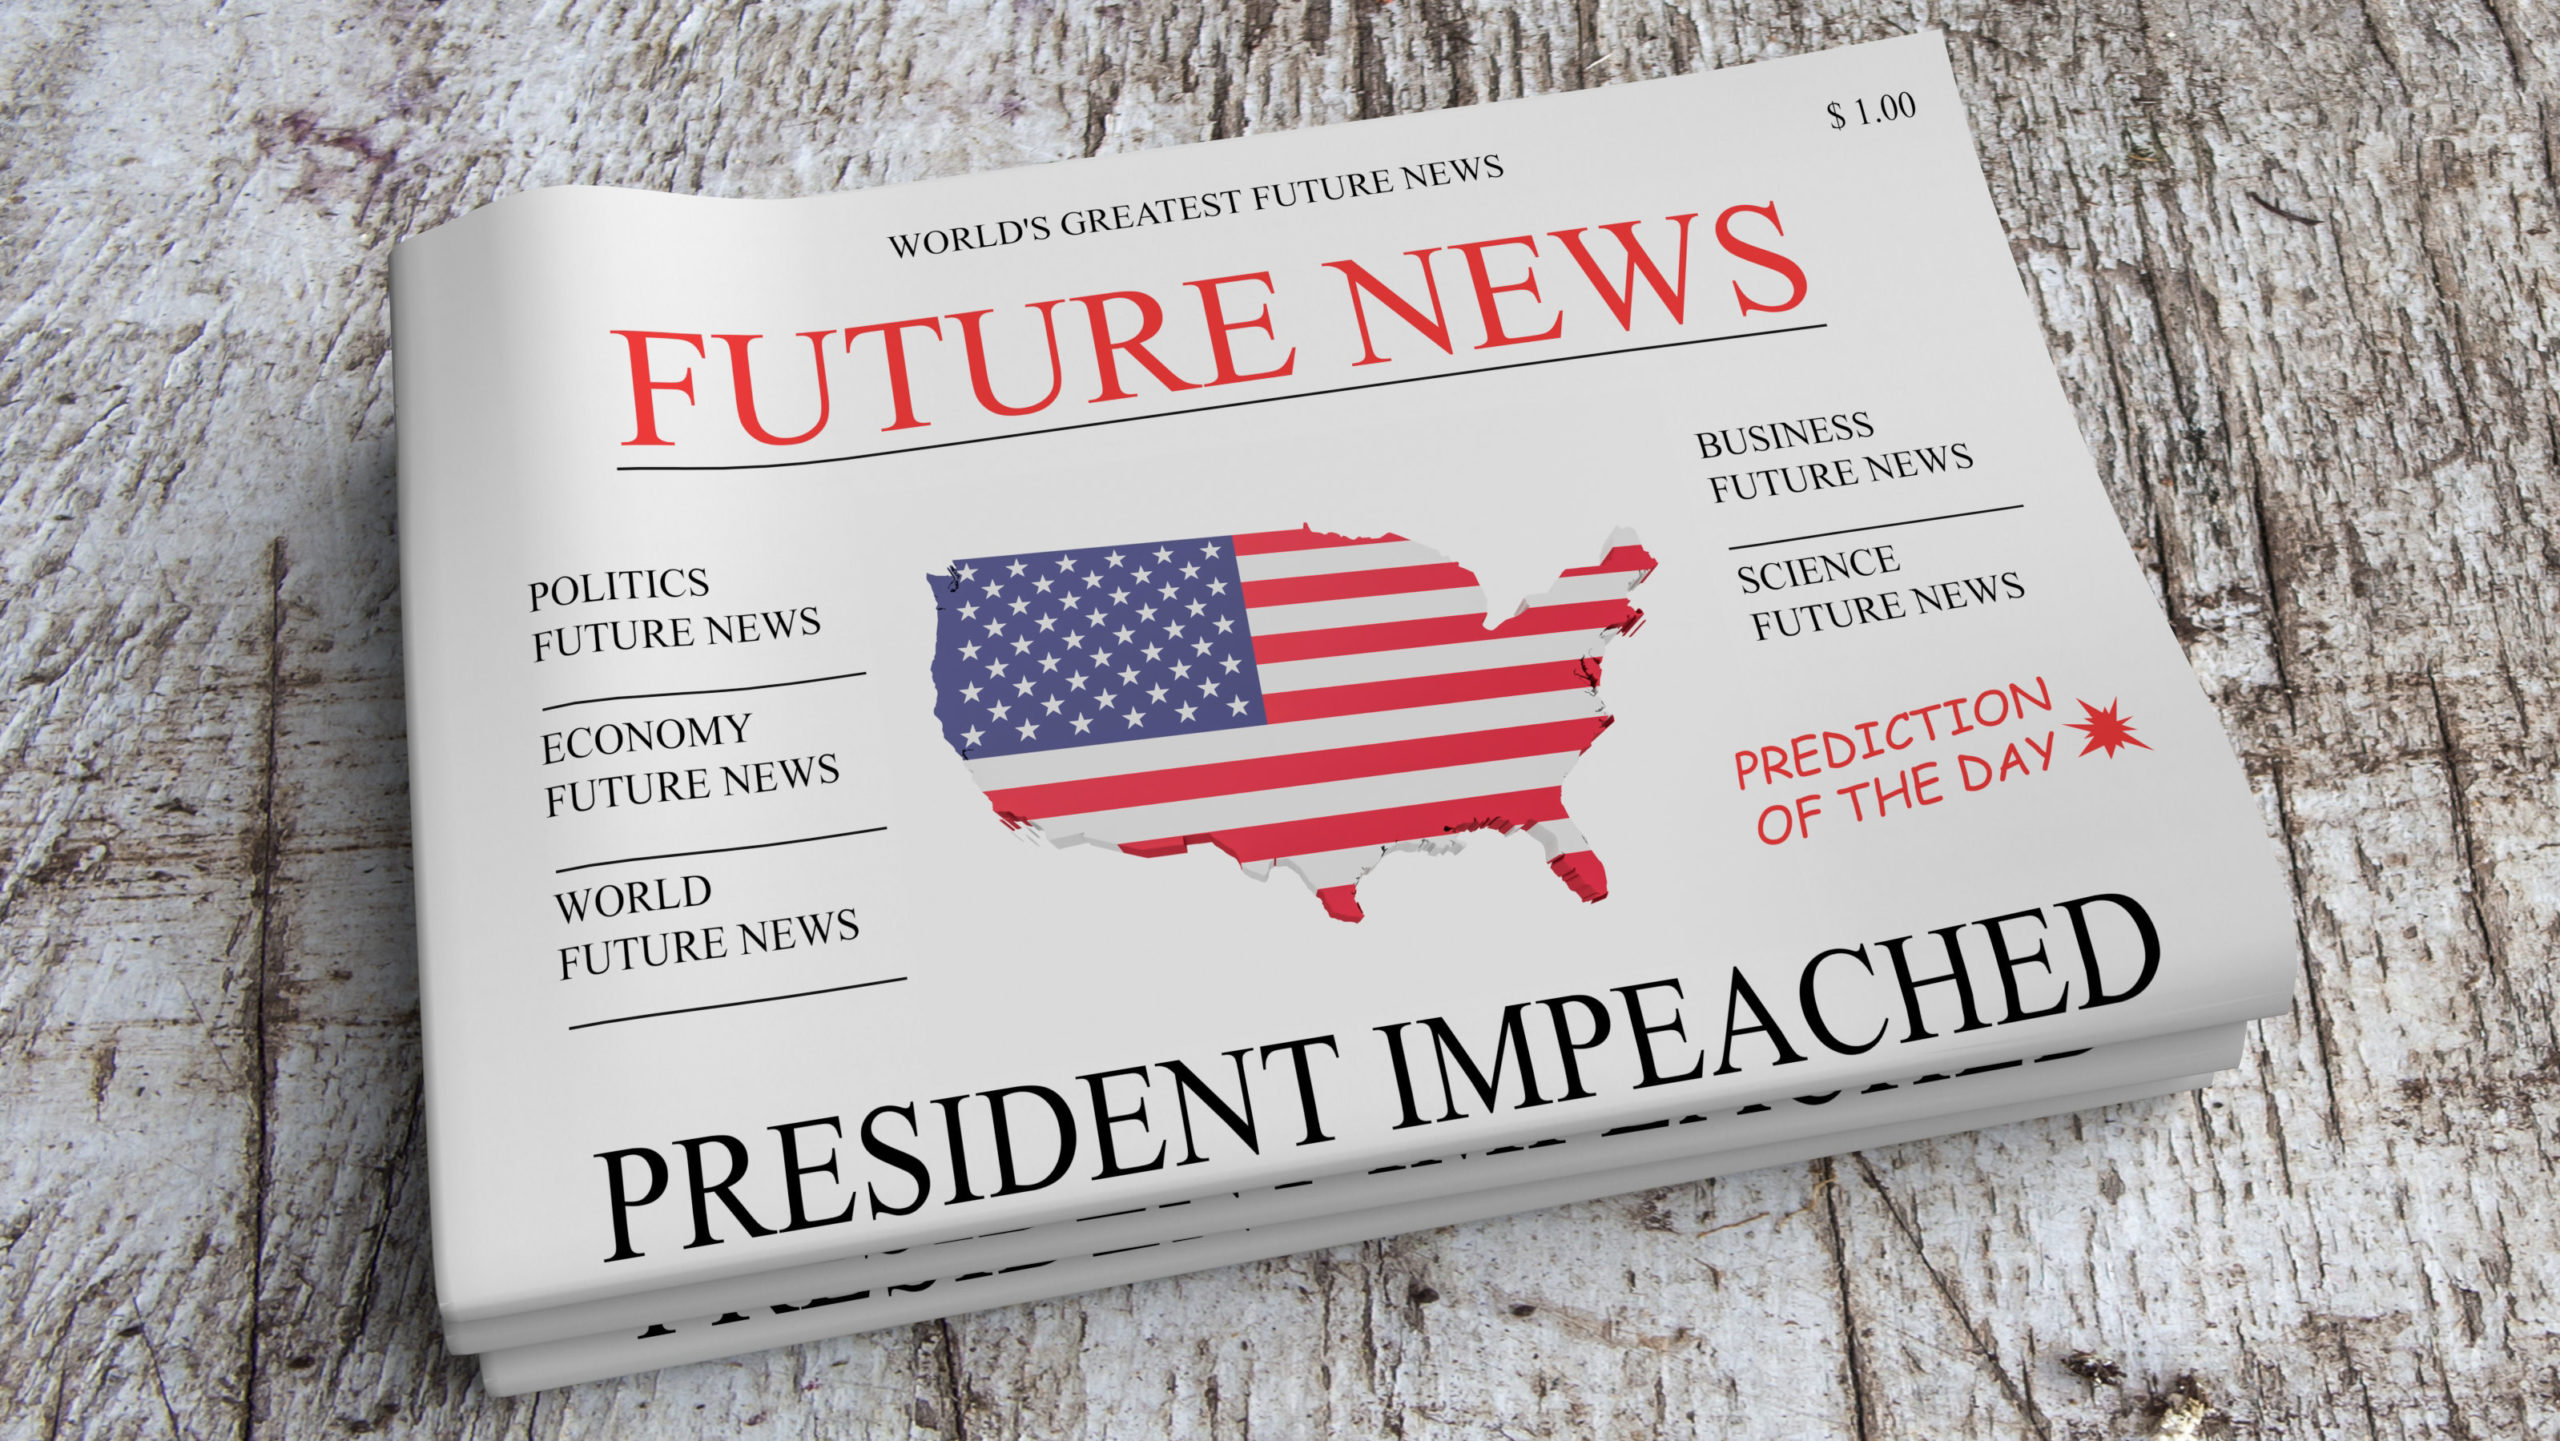 Stay Updated on the Latest Impeachment News With This Site